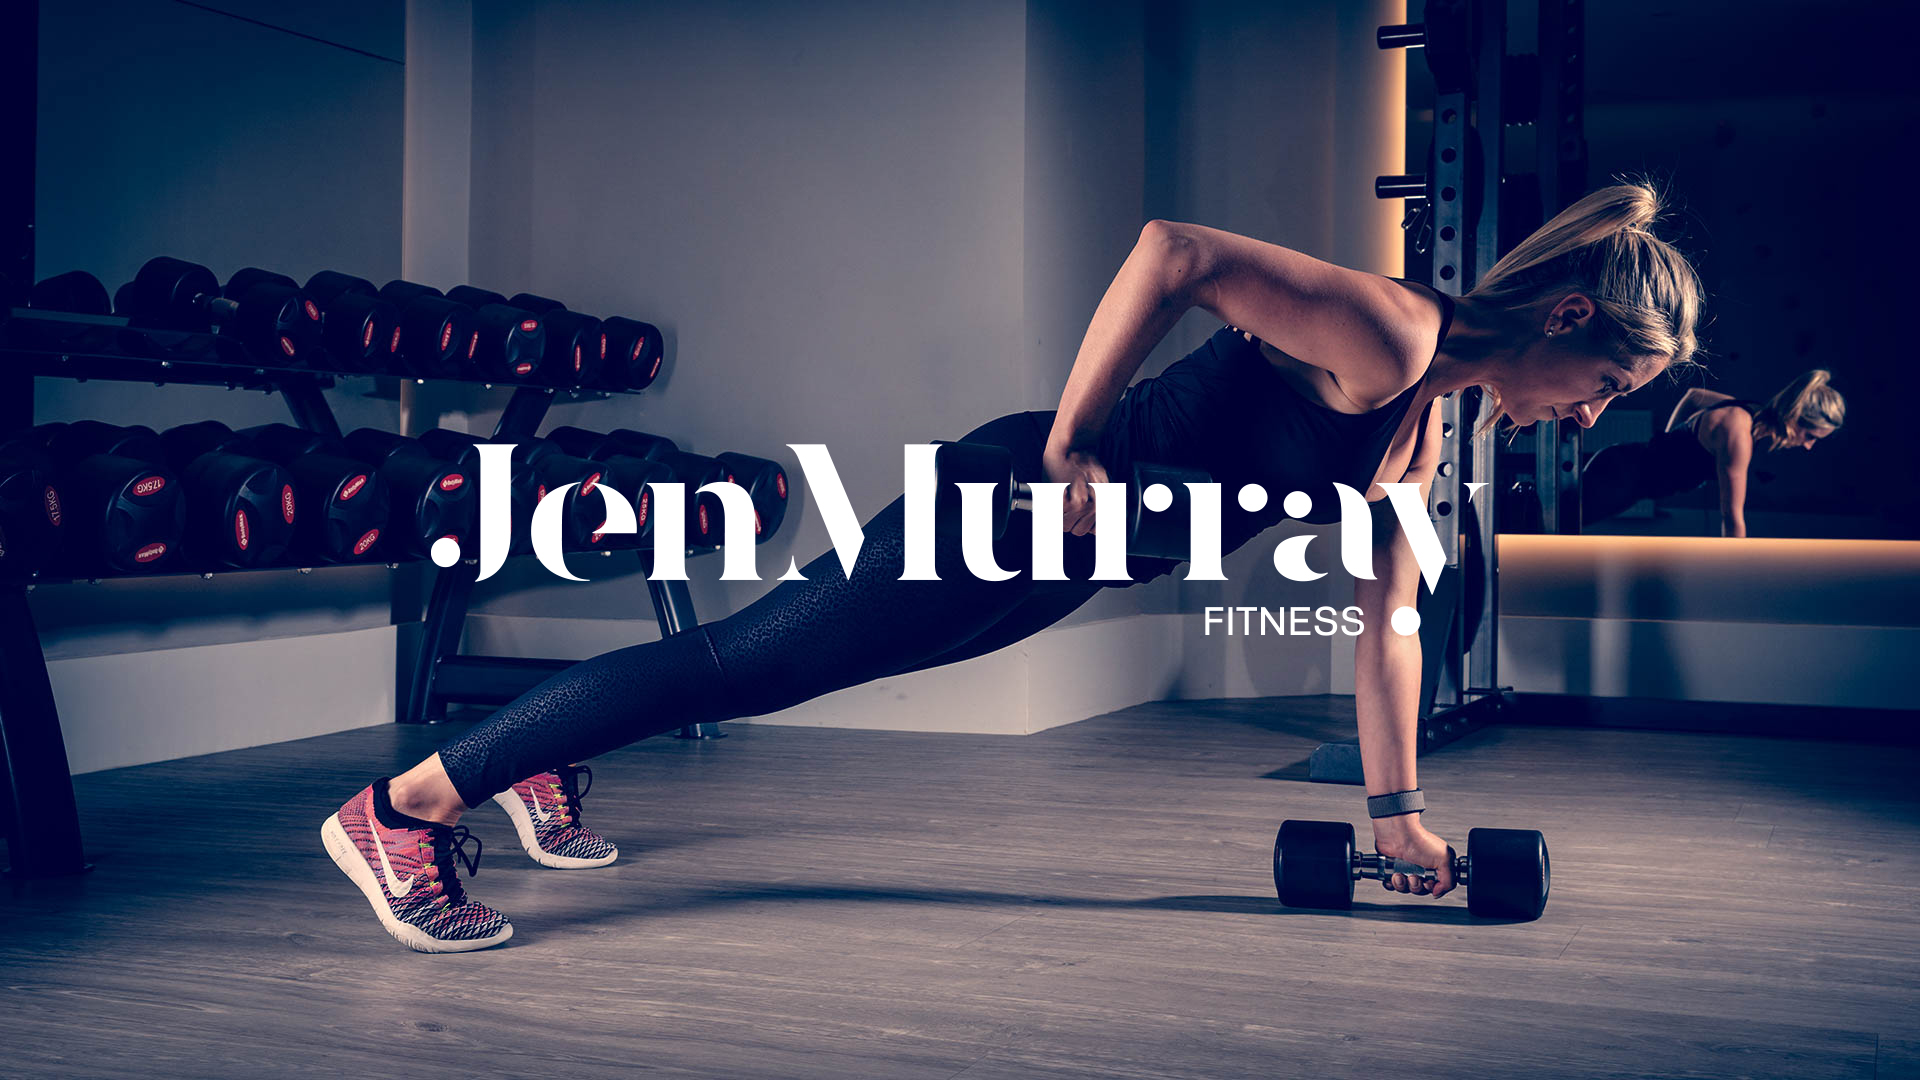 Fitness image displaying a logo for Jen Murray Personal Trainer created by KYAK Studio